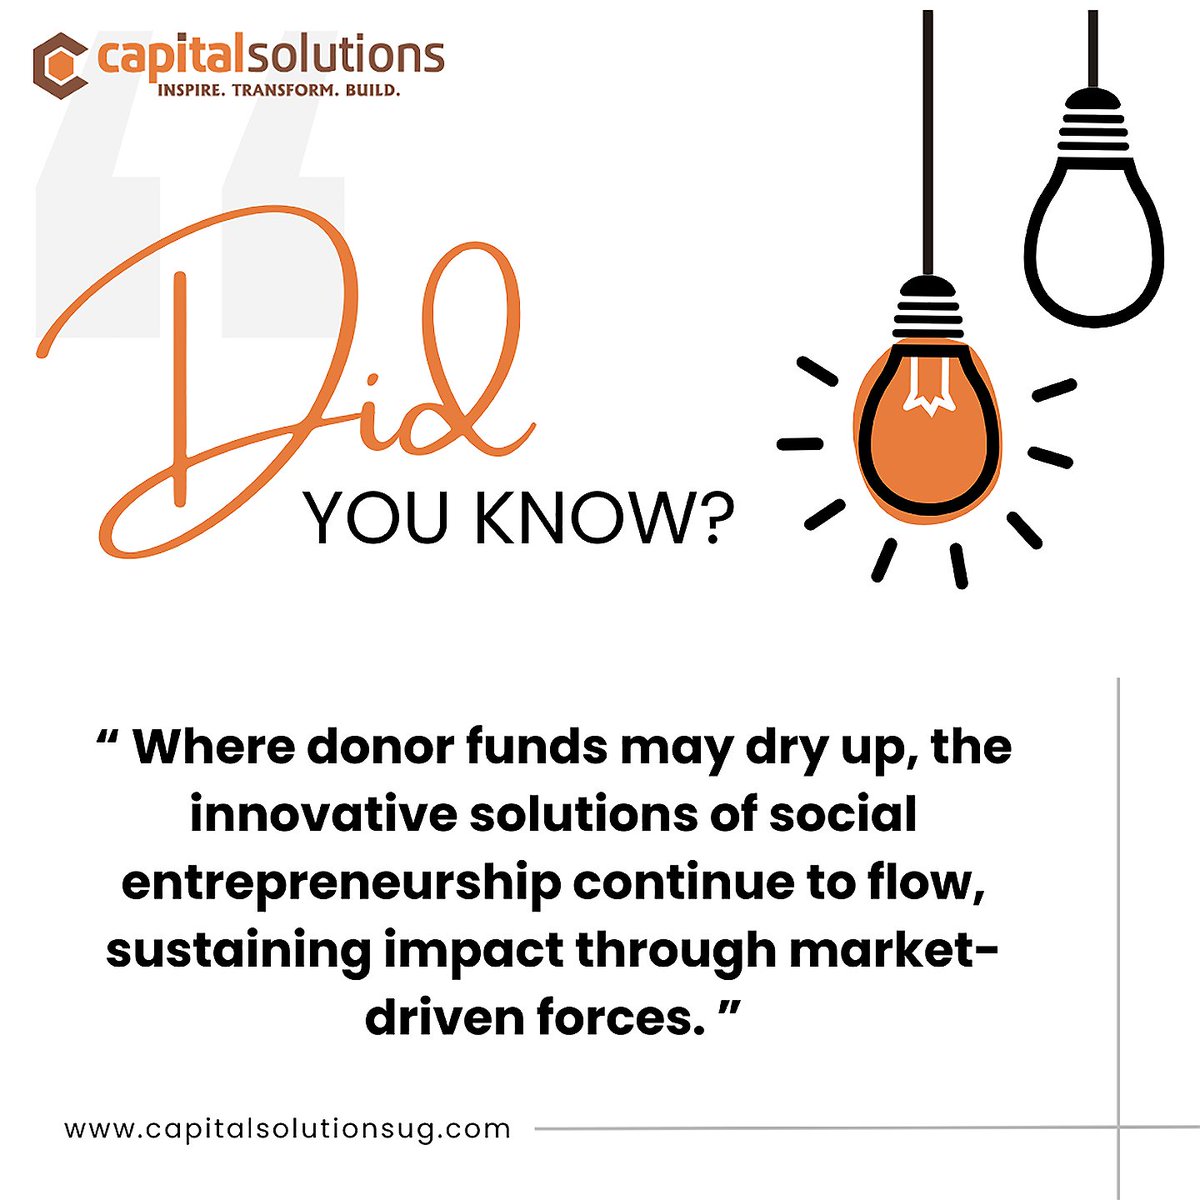 One of the most significant advantages of social entrepreneurship is its ability to achieve sustainability without the constant need for external #funding. #donor #FinancialFreedom #socialentrepreneurship #Sustainability #Innovation